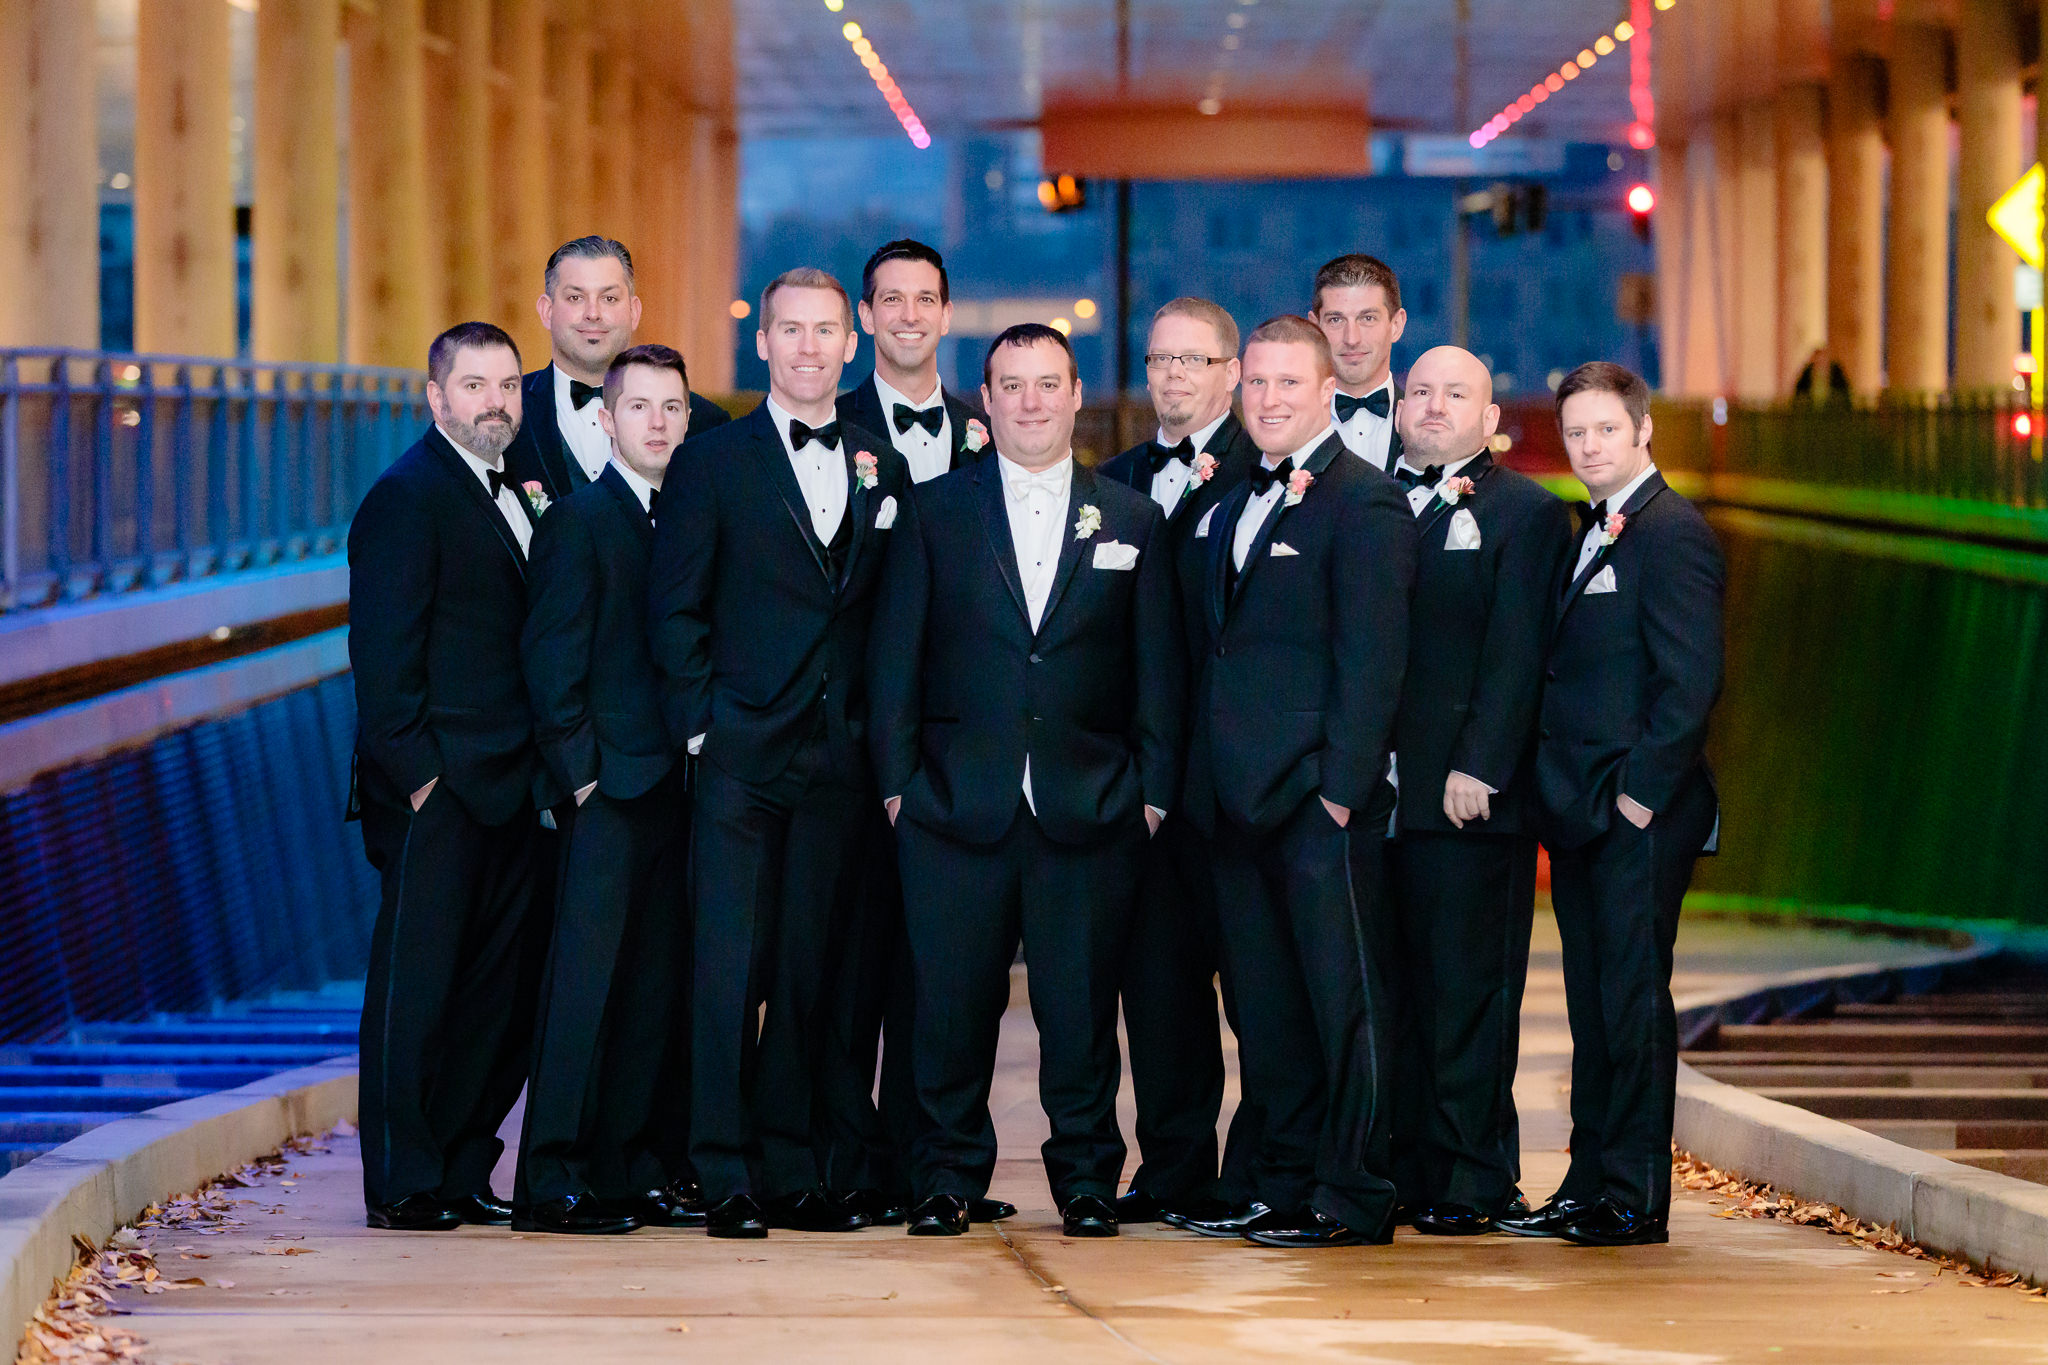 Groom with his groomsmen in black tuxedos at David L. Lawrence Convention Center